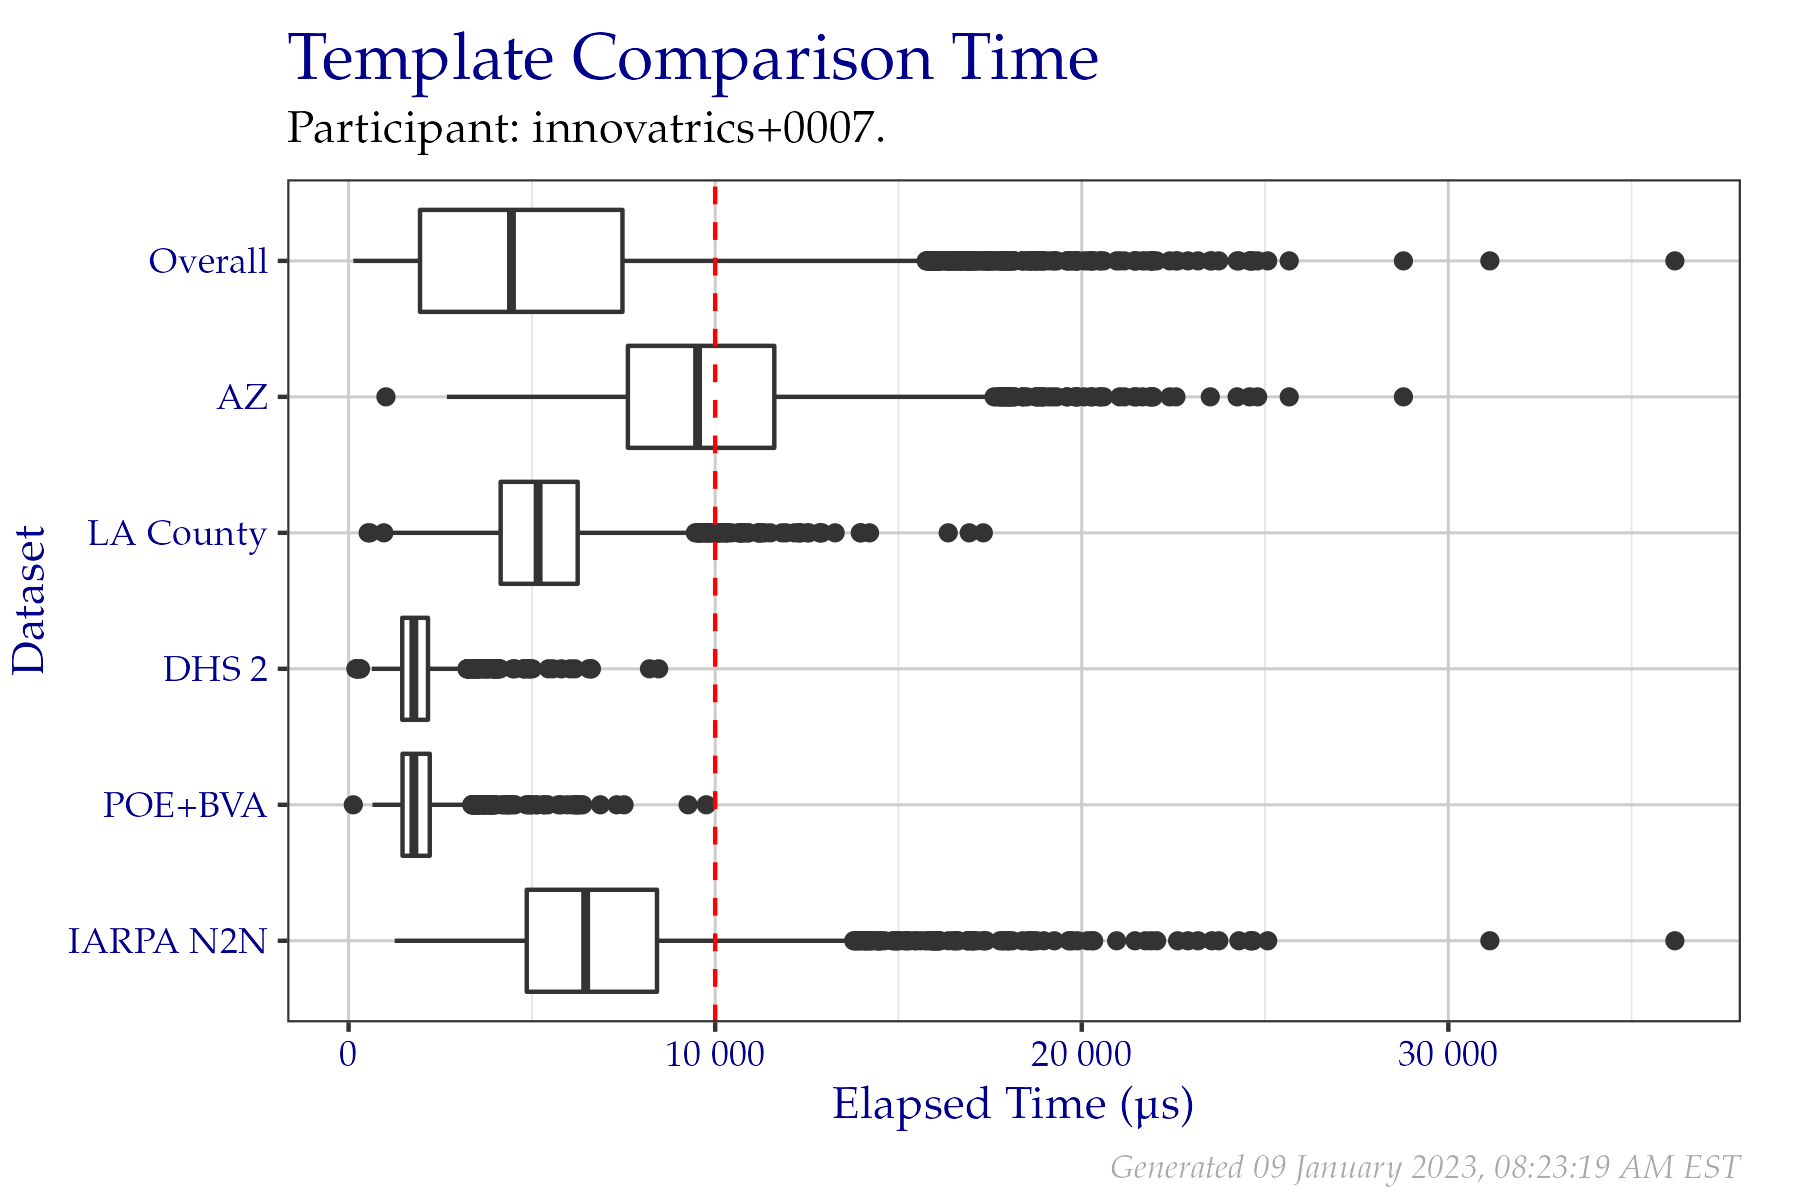 Box plots of elapsed microseconds when comparing two templates from a fixed sample of data from the PFT III evaluation. All times are used, even if a failure occurred.  Tabular versions of this data are shown in Table 2.4.